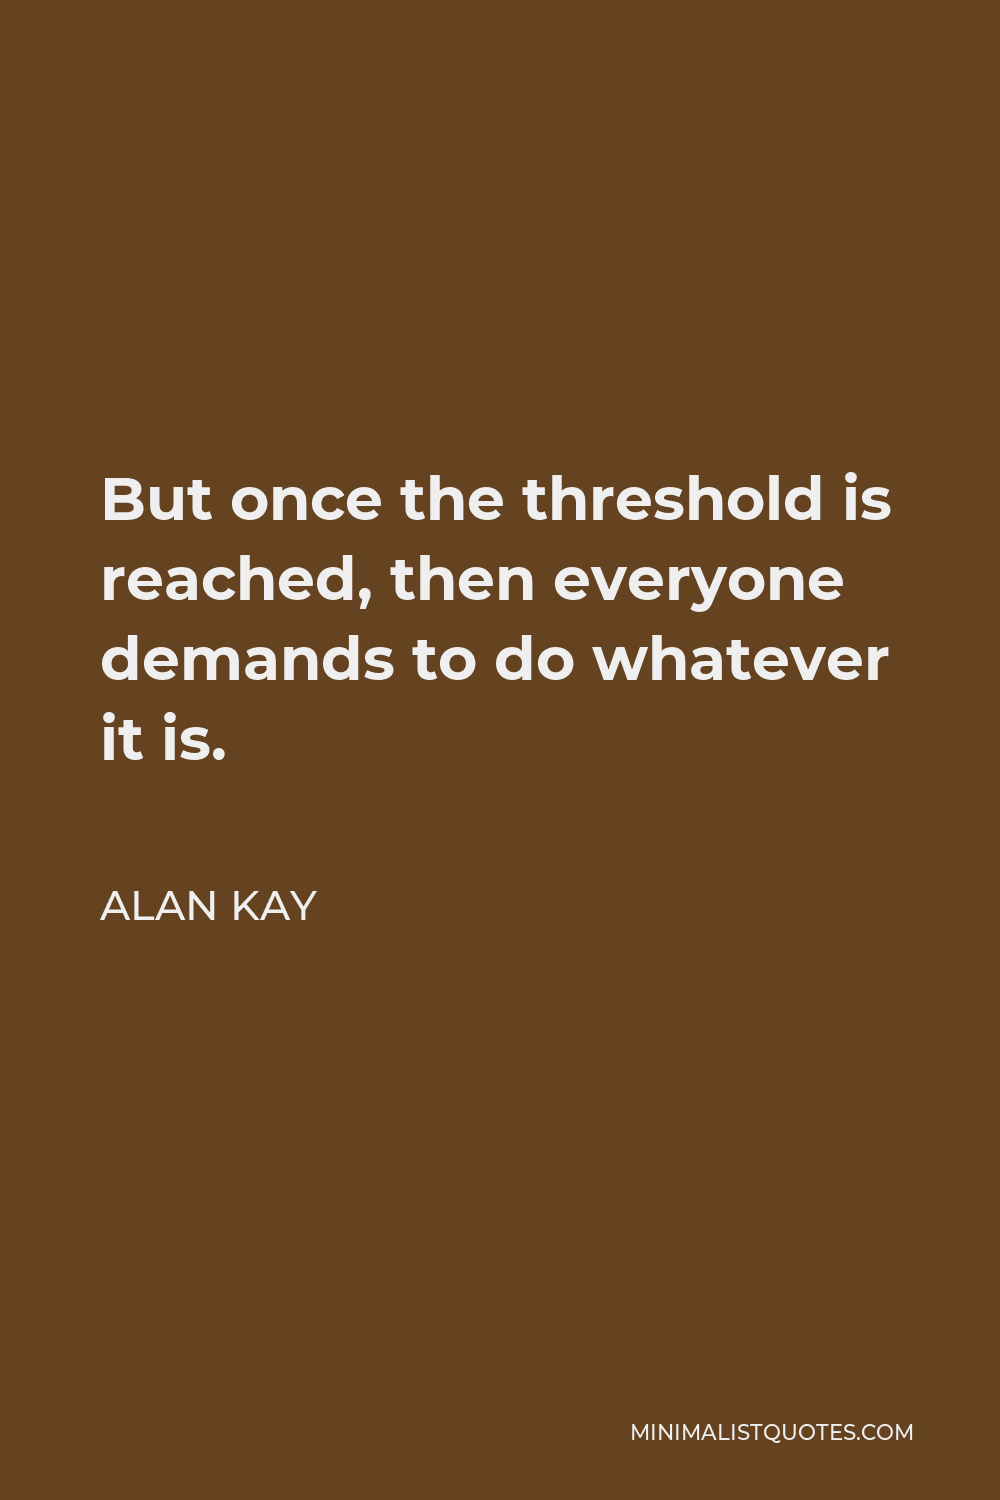 Alan Kay Quote - But once the threshold is reached, then everyone demands to do whatever it is.